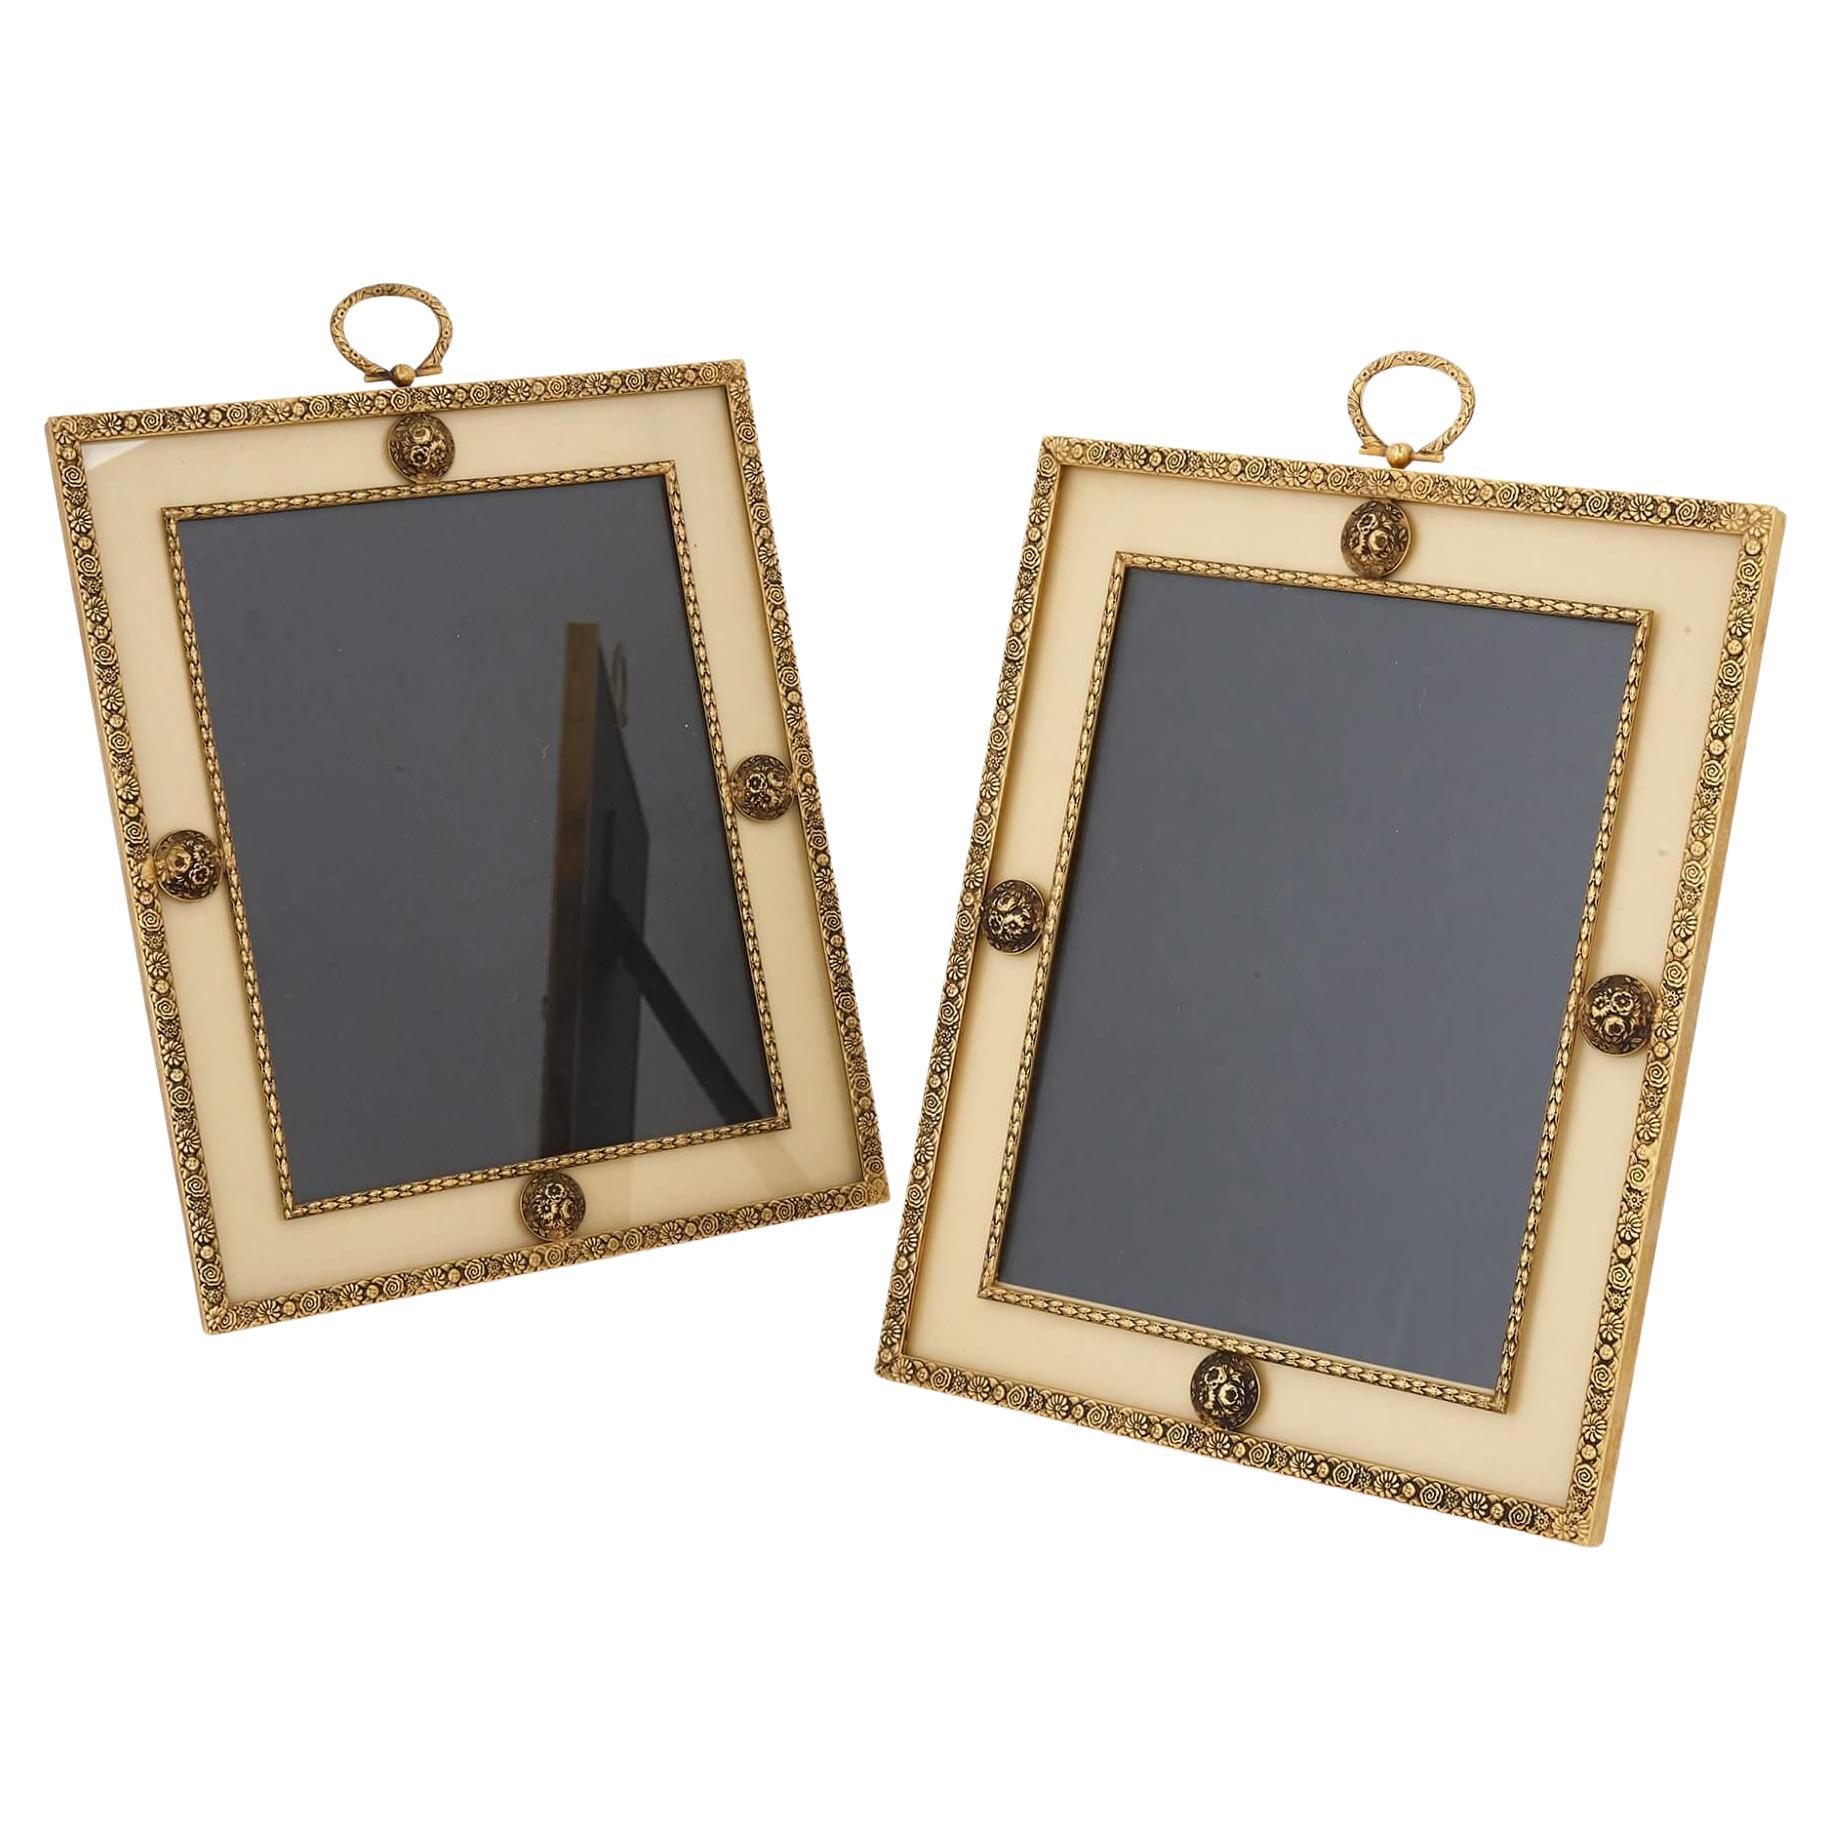 Pair of French Gilt Metal Frames by Puiforcat